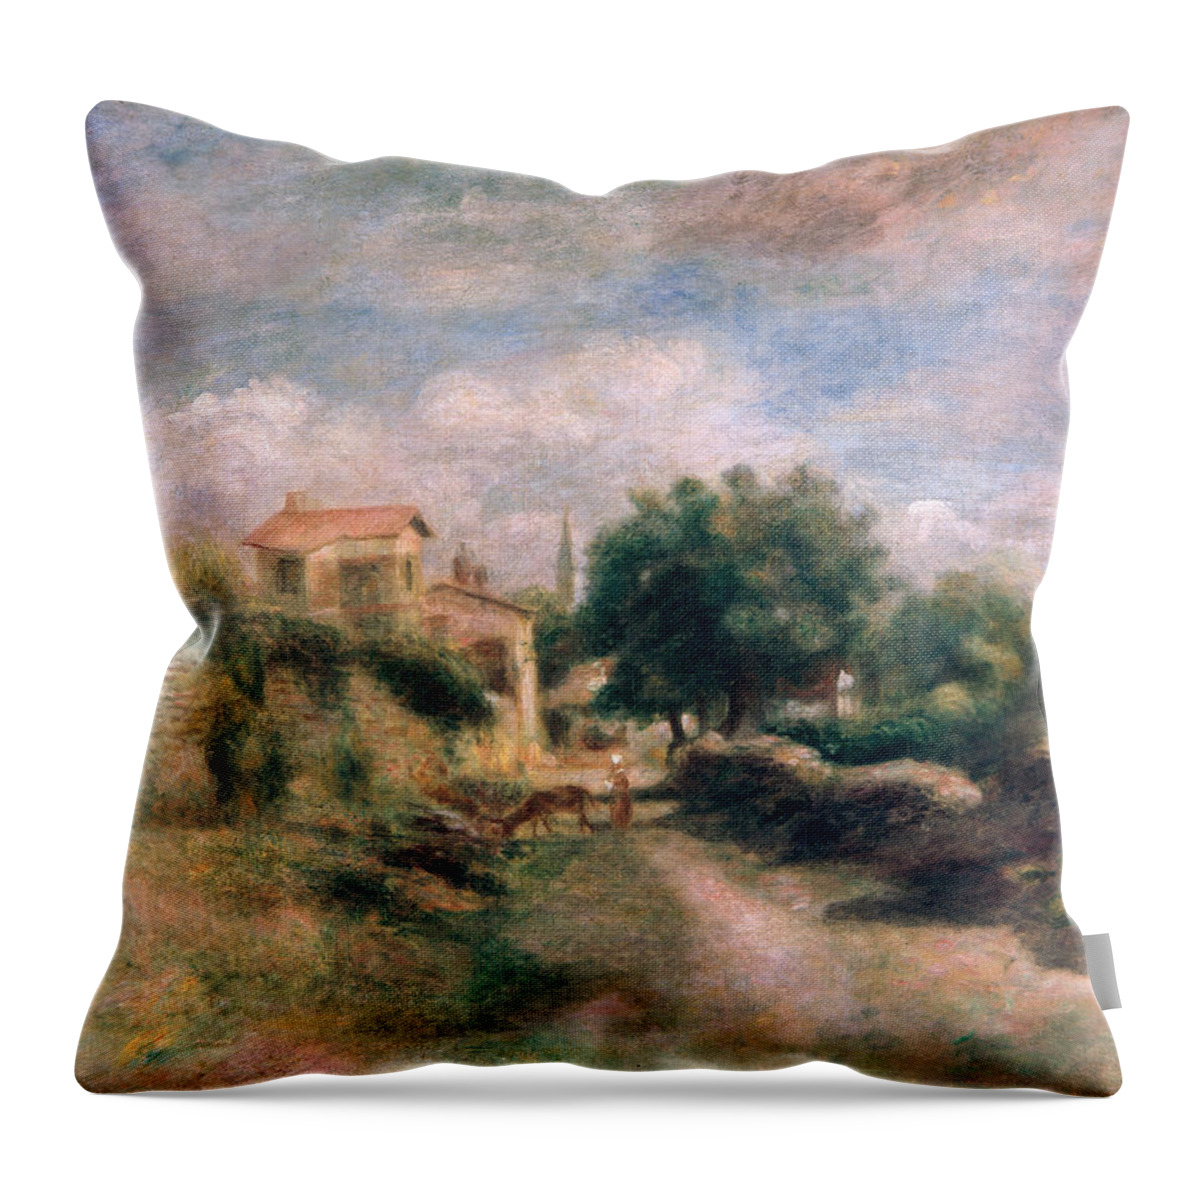 The Throw Pillow featuring the painting The Farm by Renoir